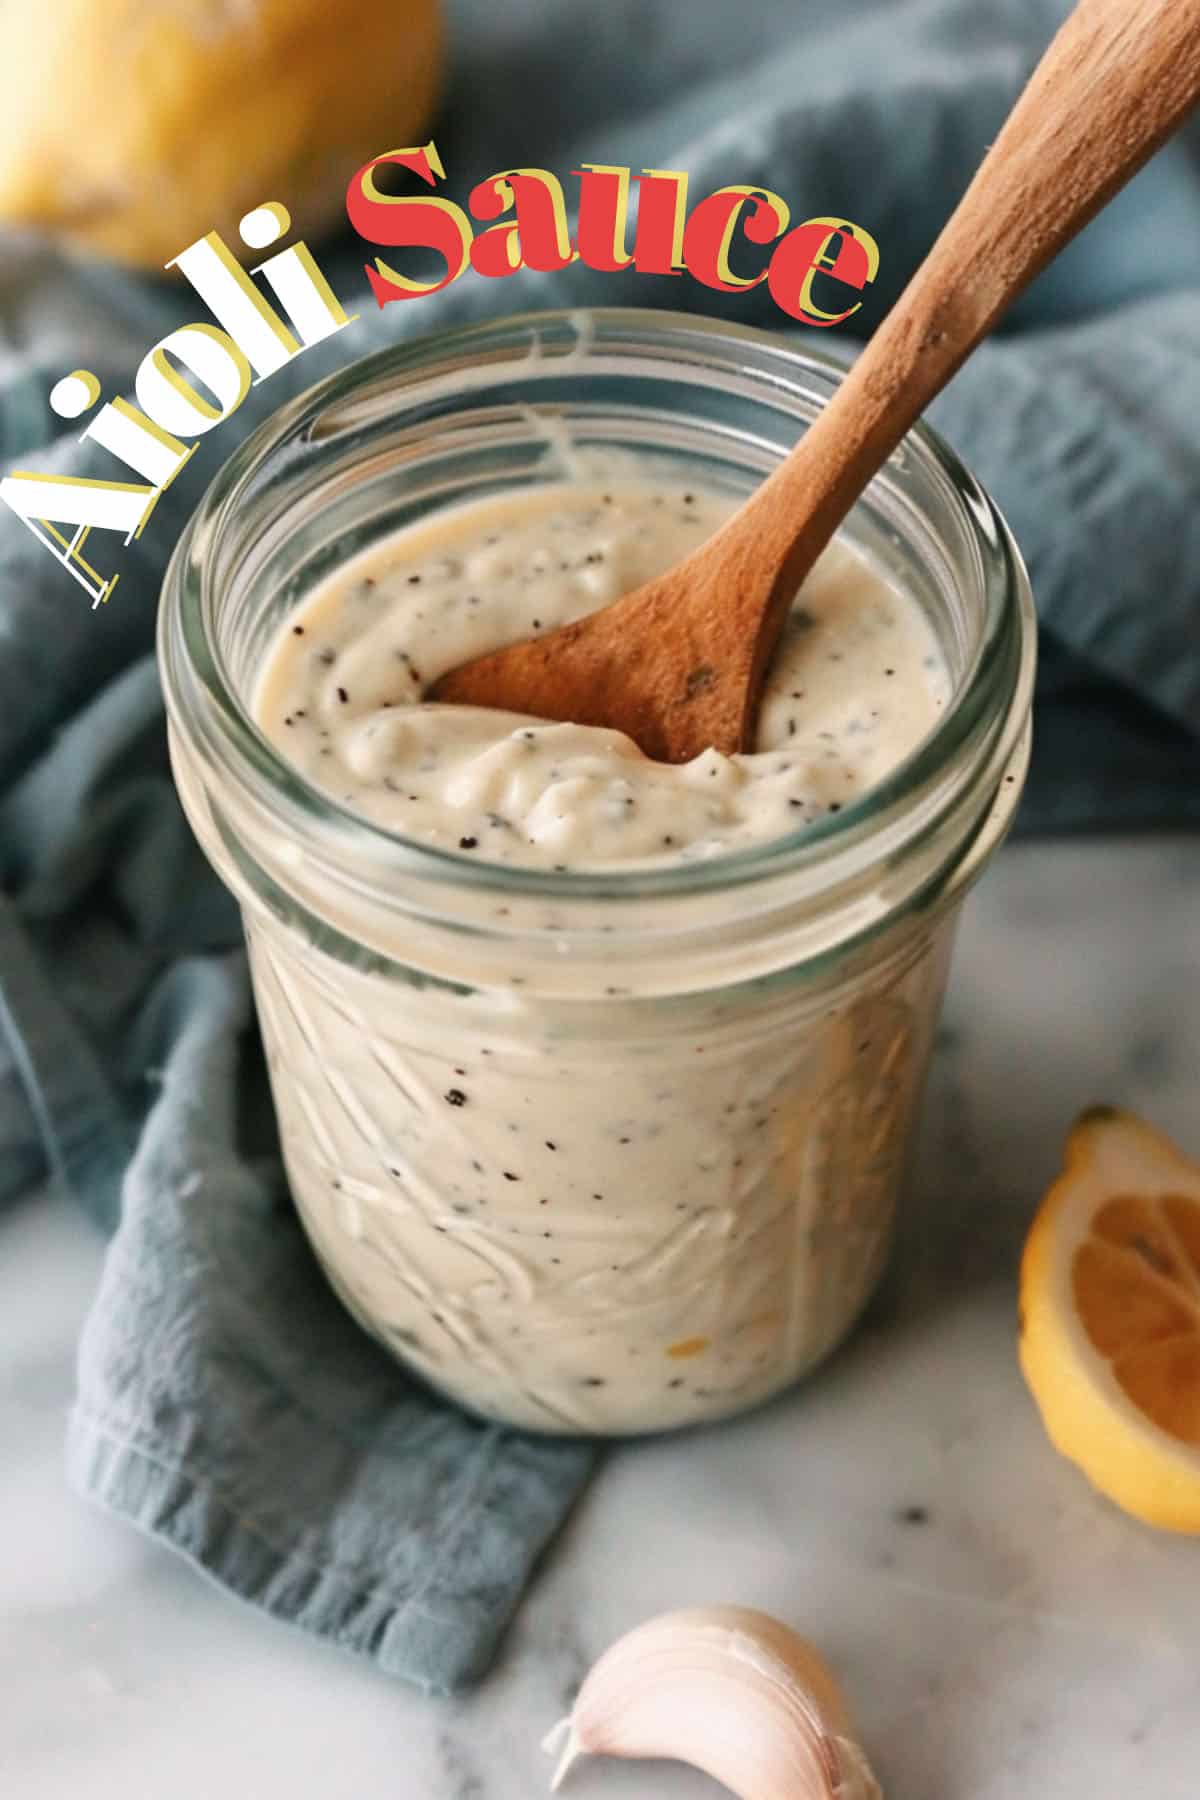 Fresh, homemade lemon aioli in a glass jar with a spoon, offering a flavorful upgrade compared to store-bought options.